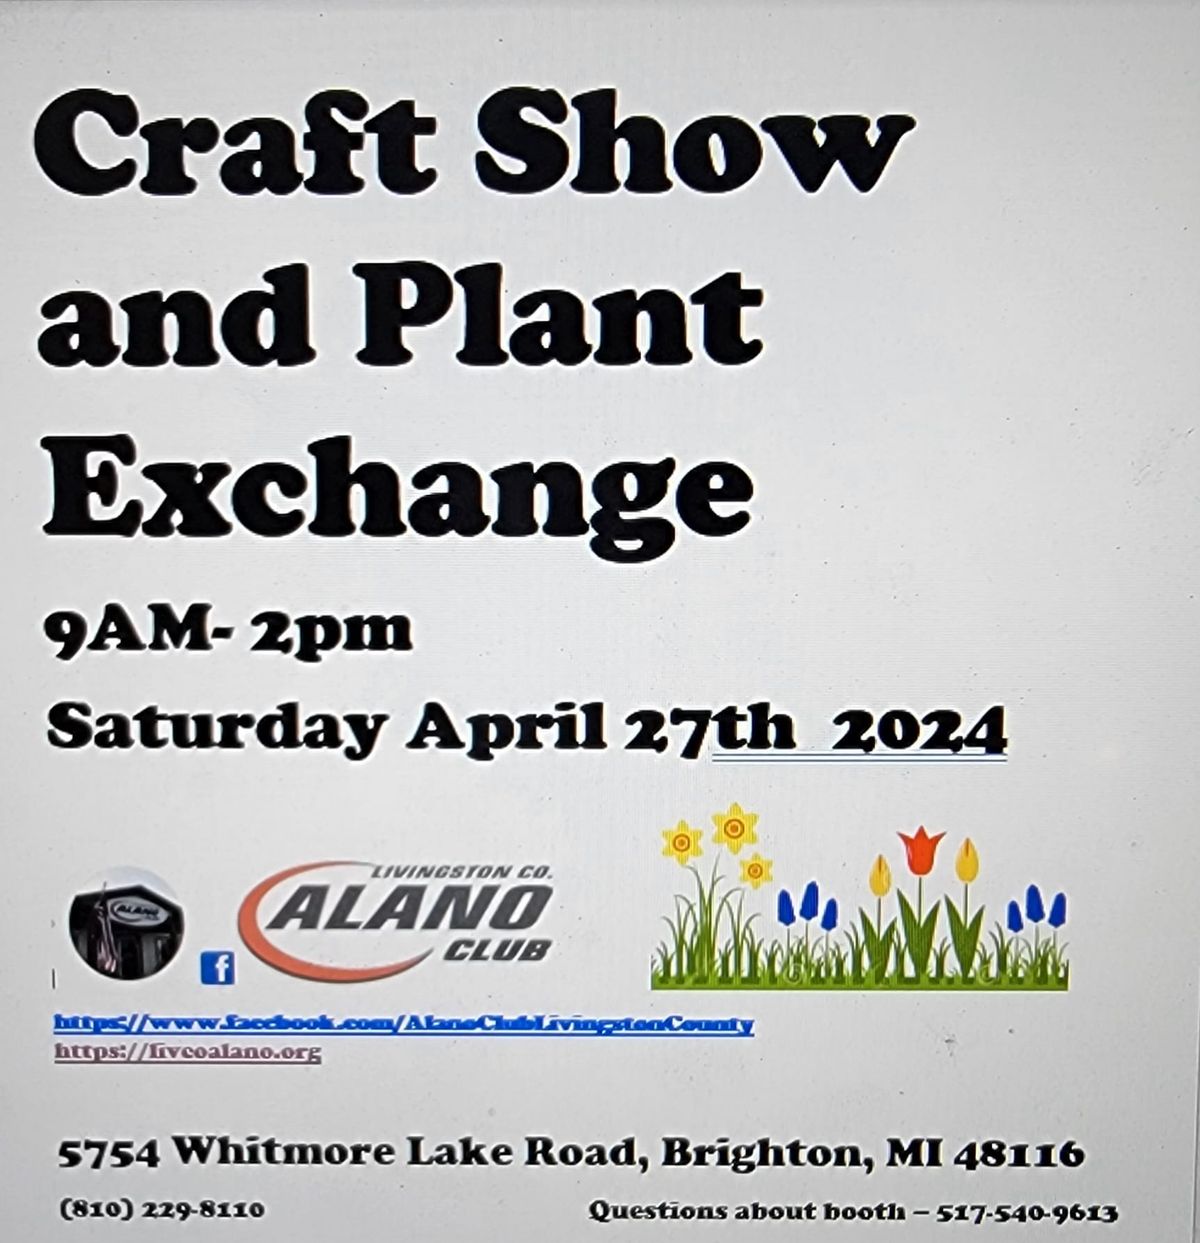 Craft show and plant exchange